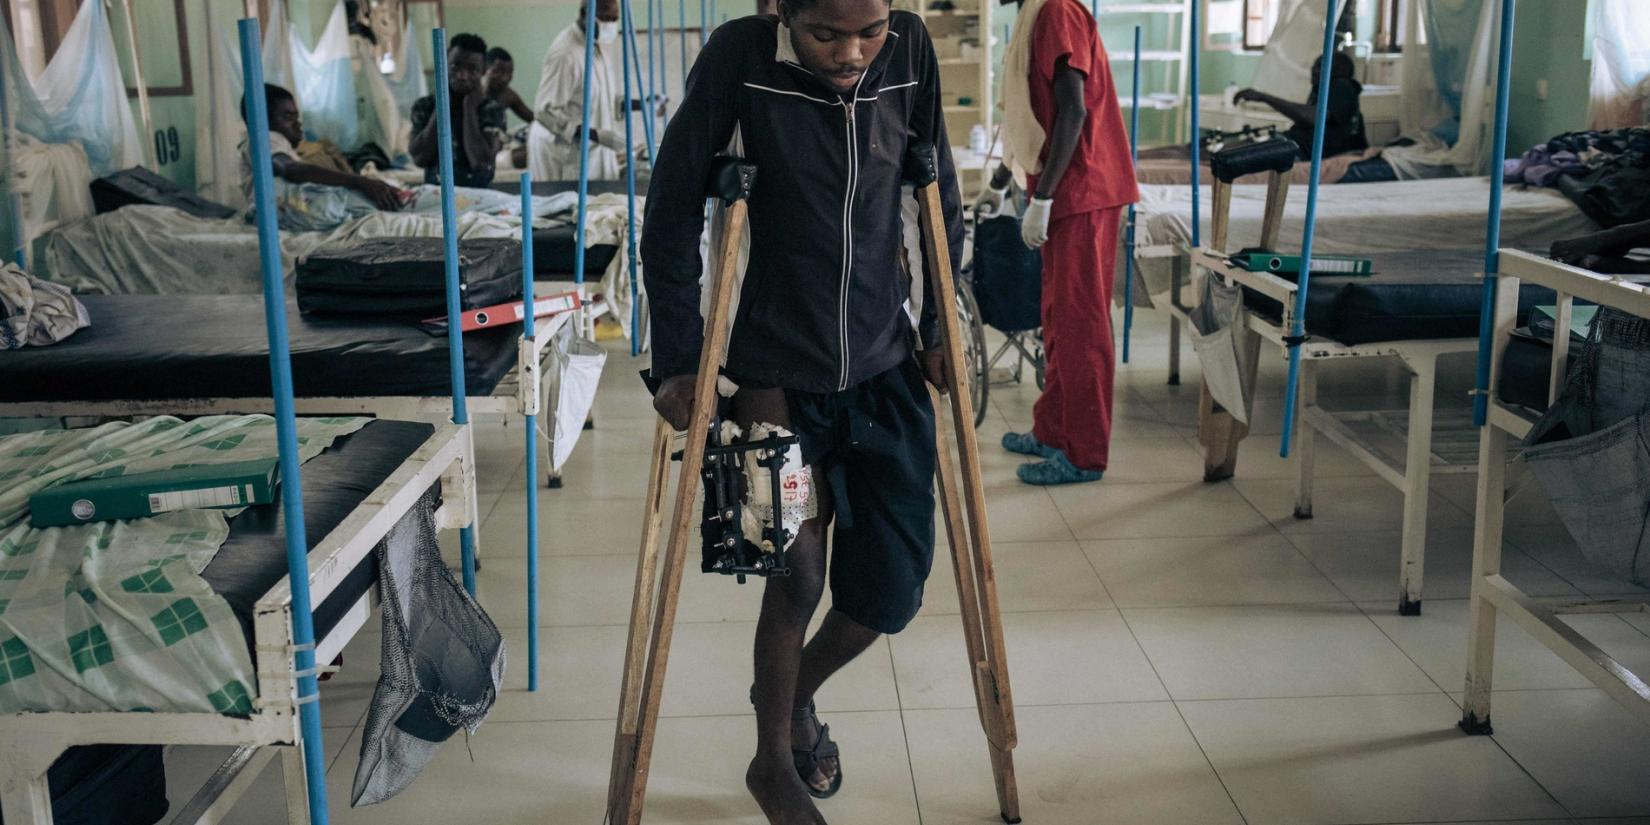 A young African man with a gunshot wound to the leg walks with difficulty on crutches in a hospital.